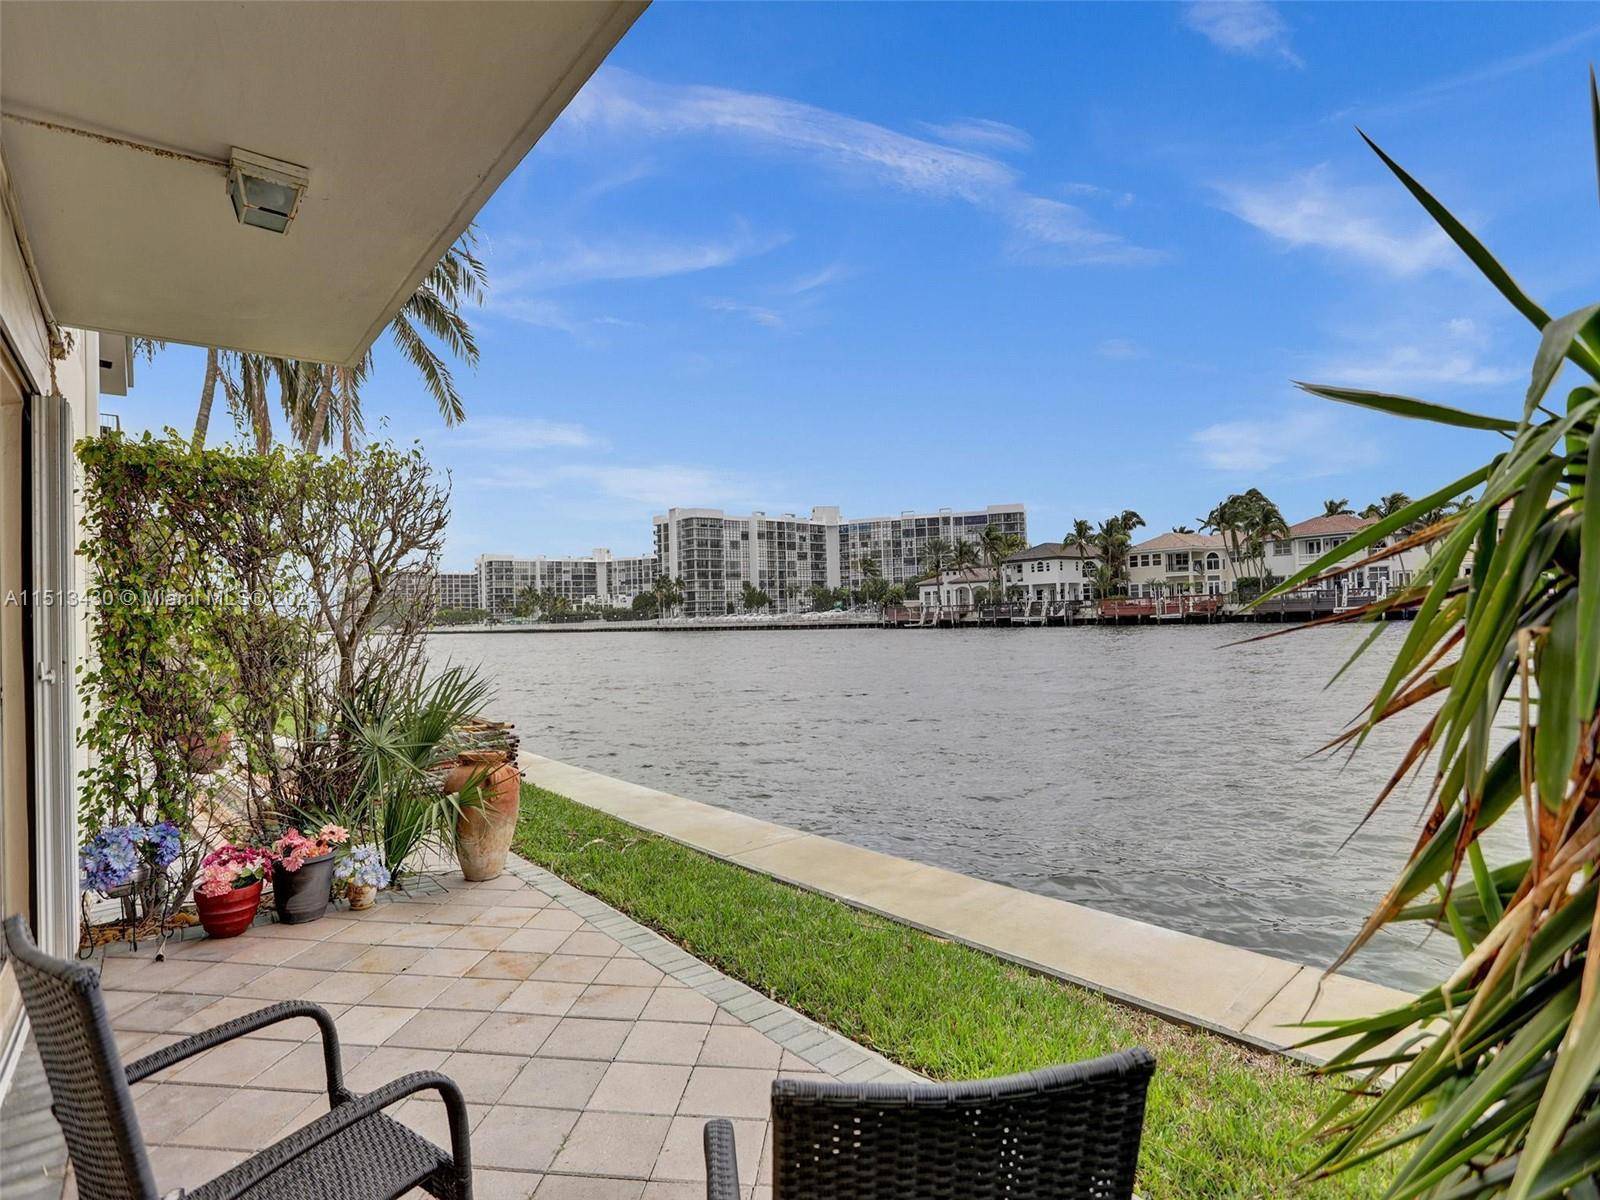 Experience the essence of waterfront living in this corner unit condo, boasting 2bedrooms 2bathrooms.